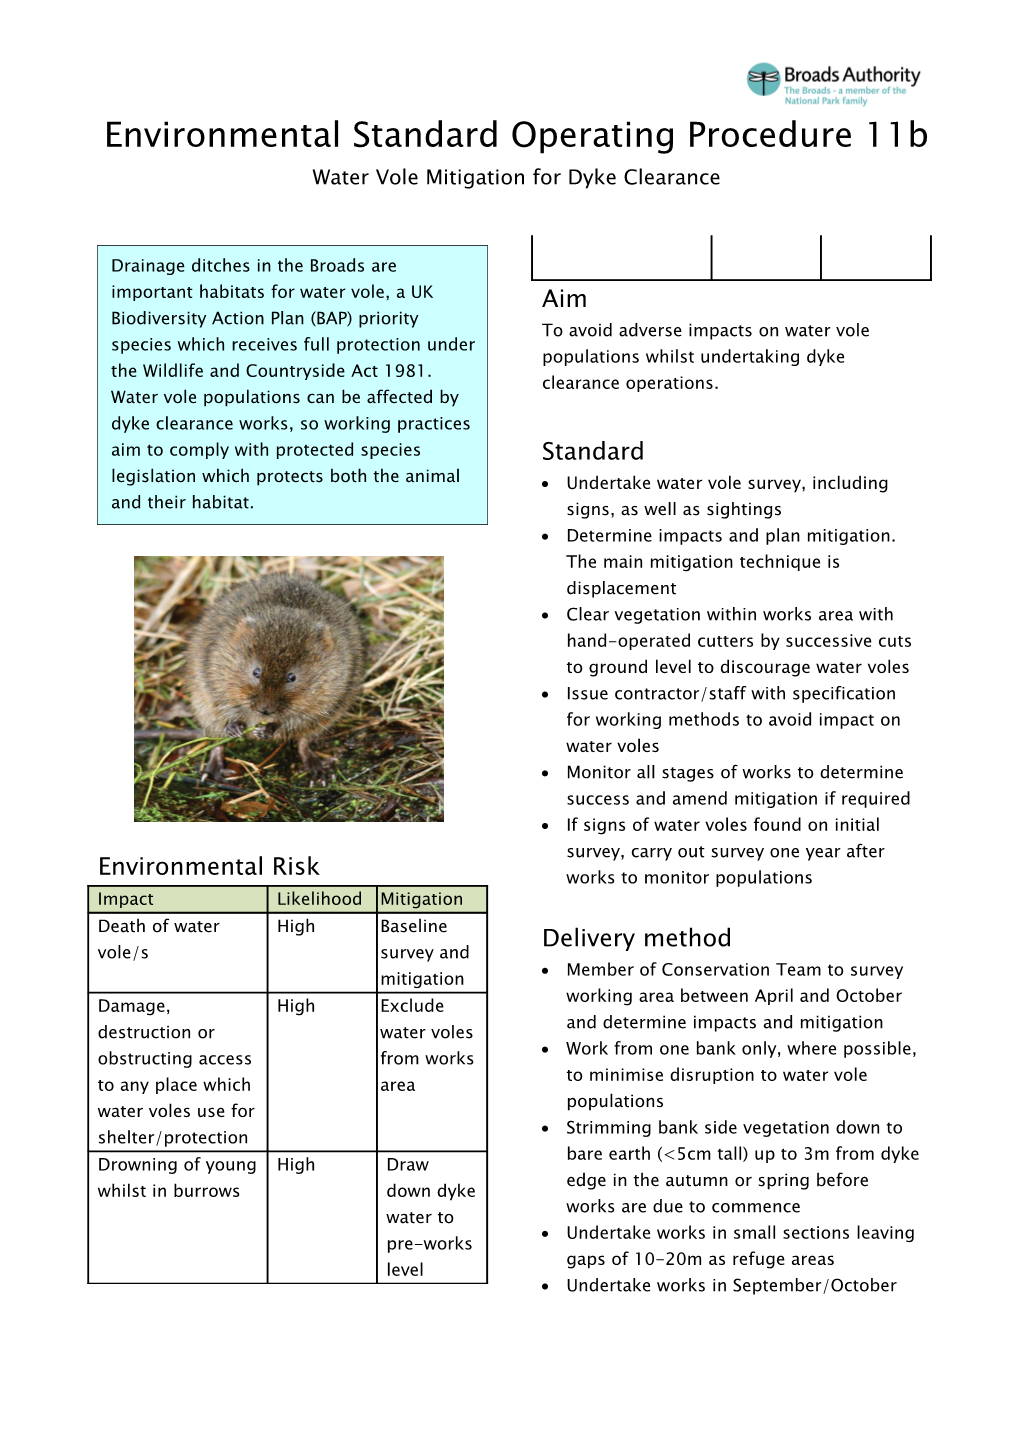 To Avoid Adverse Impacts on Water Vole Populations Whilst Undertaking Dyke Clearance Operations